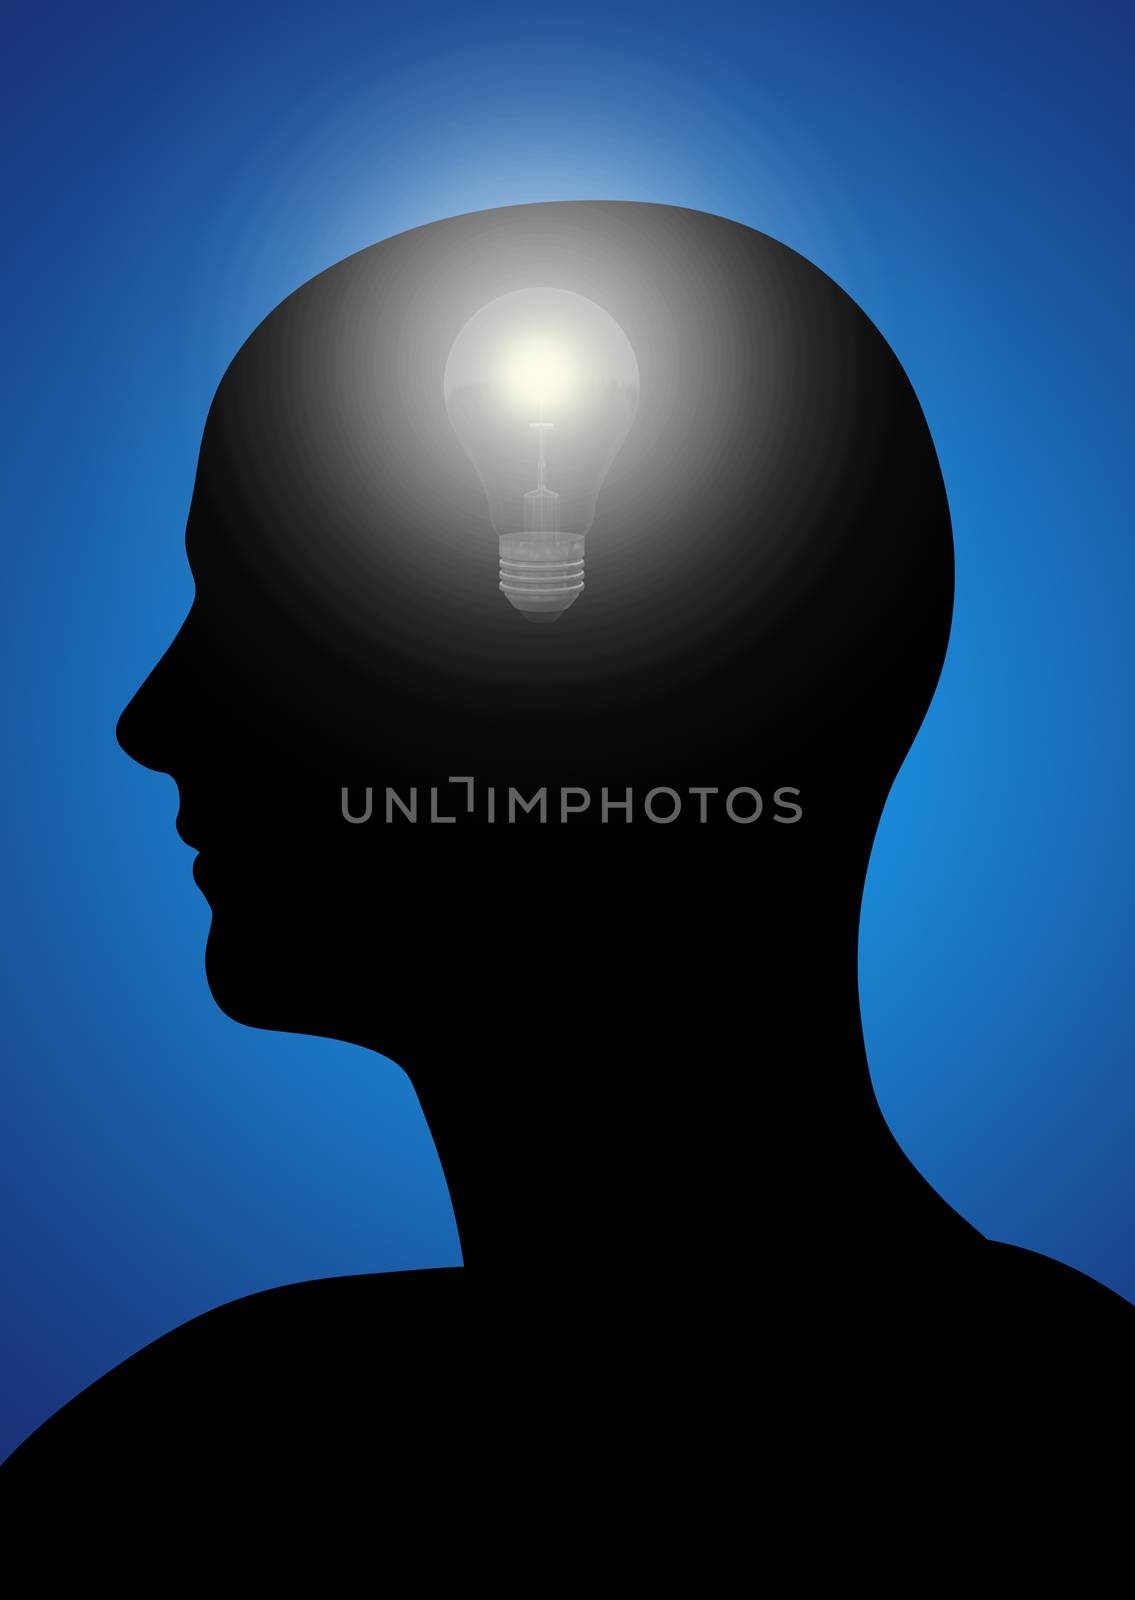 profile of a man with gears and a light bulb inside his head